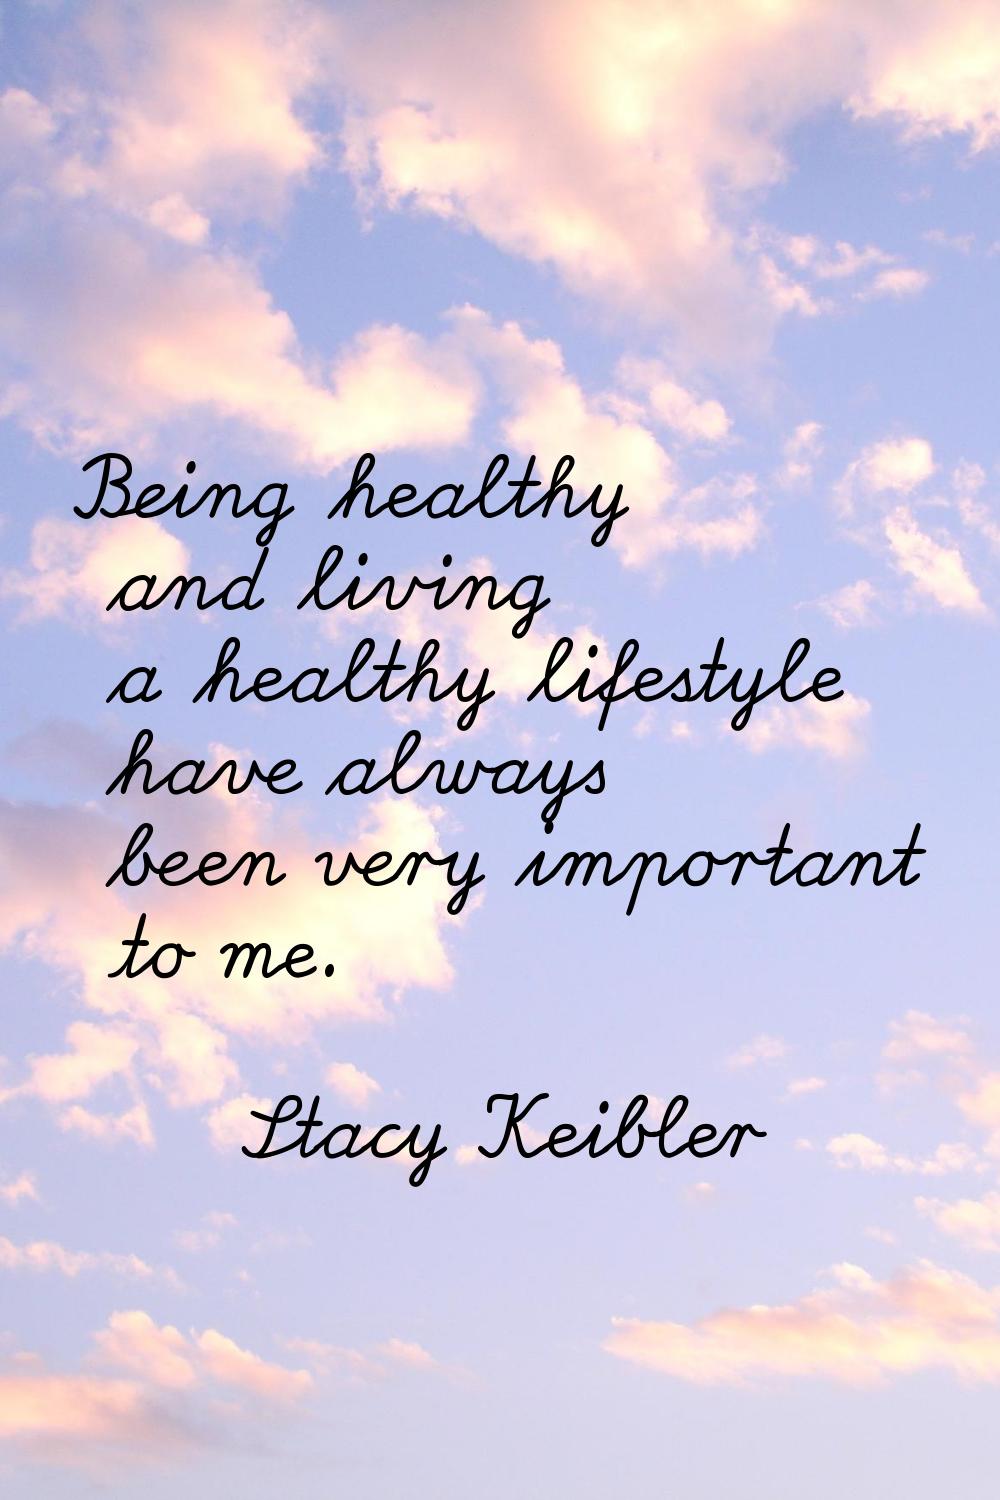 Being healthy and living a healthy lifestyle have always been very important to me.